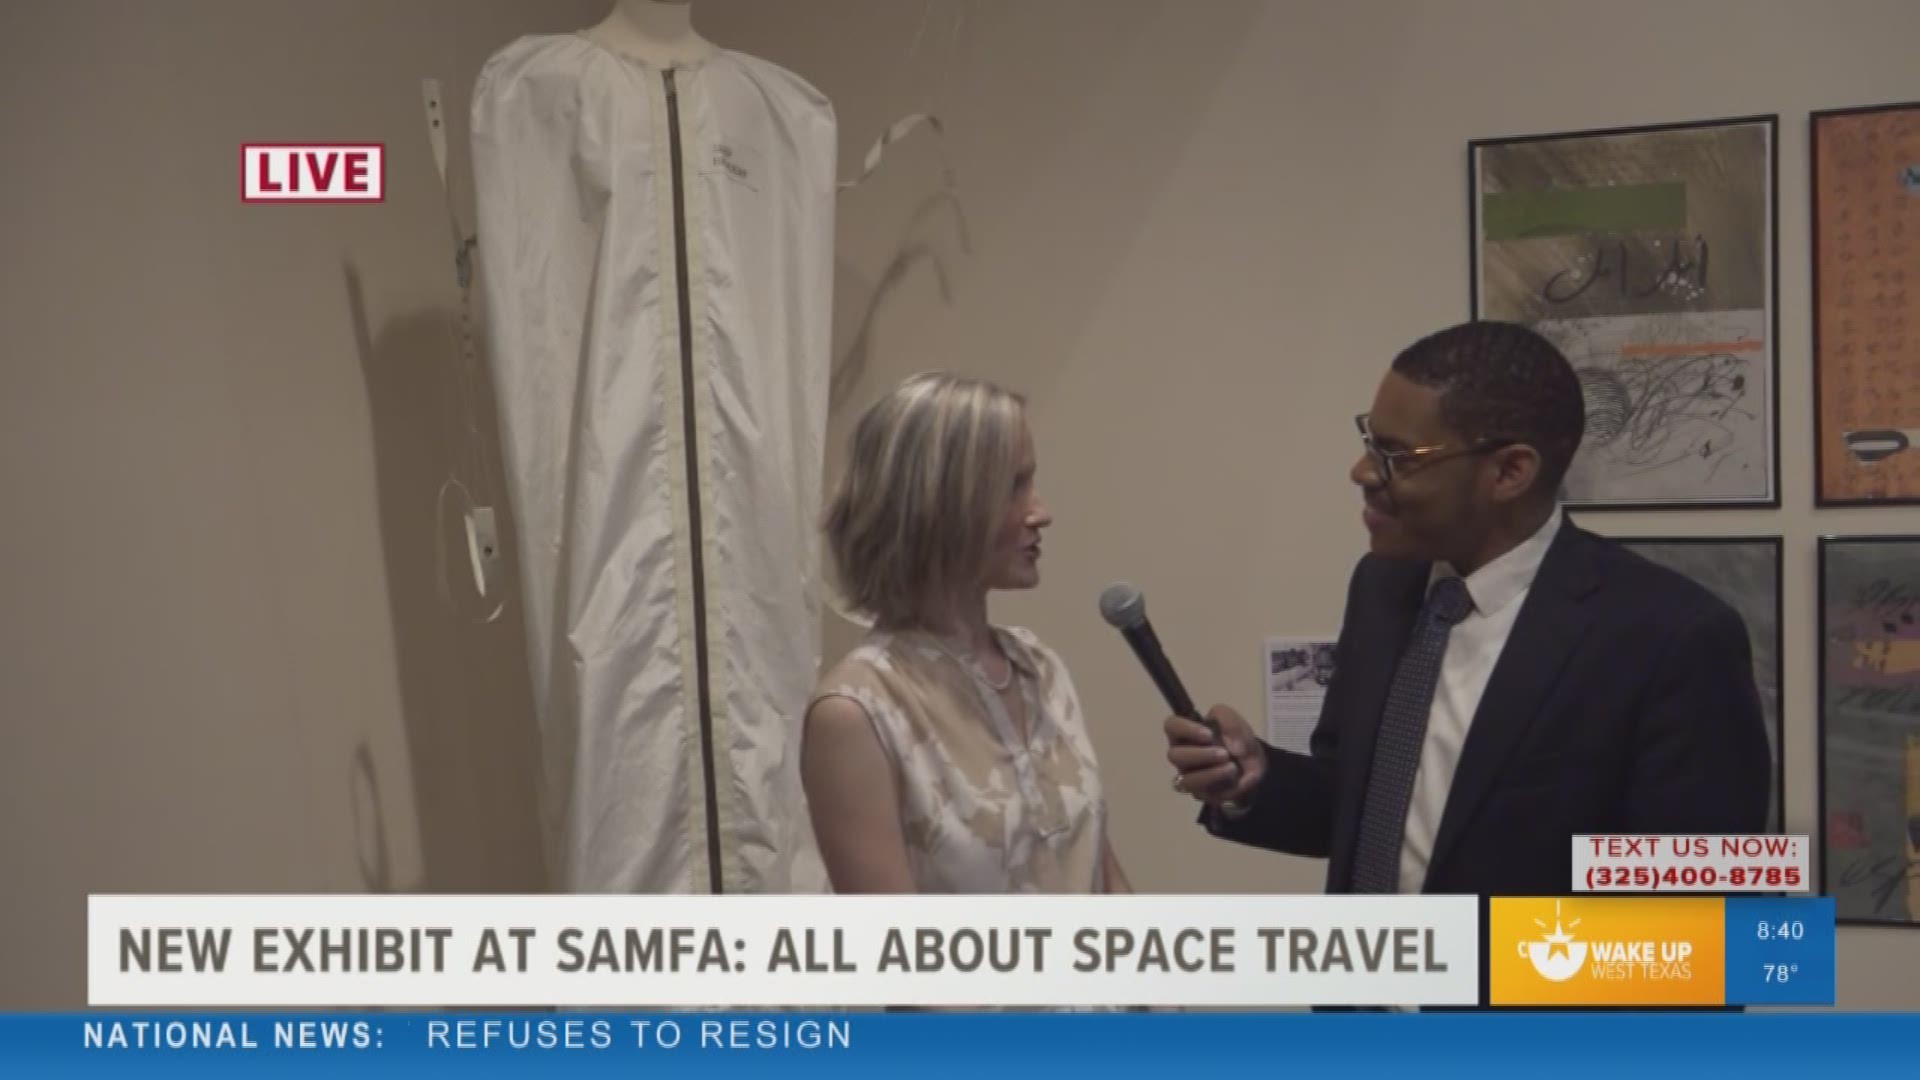 Our Malik Mingo spoke with the collections manager at the San Angelo Museum of Fine Arts and got a tour of what you can see at the new exhibit: "Frontiers: An Artistic Exploration of Space Travel, Technology, the Age of Discovery and More."